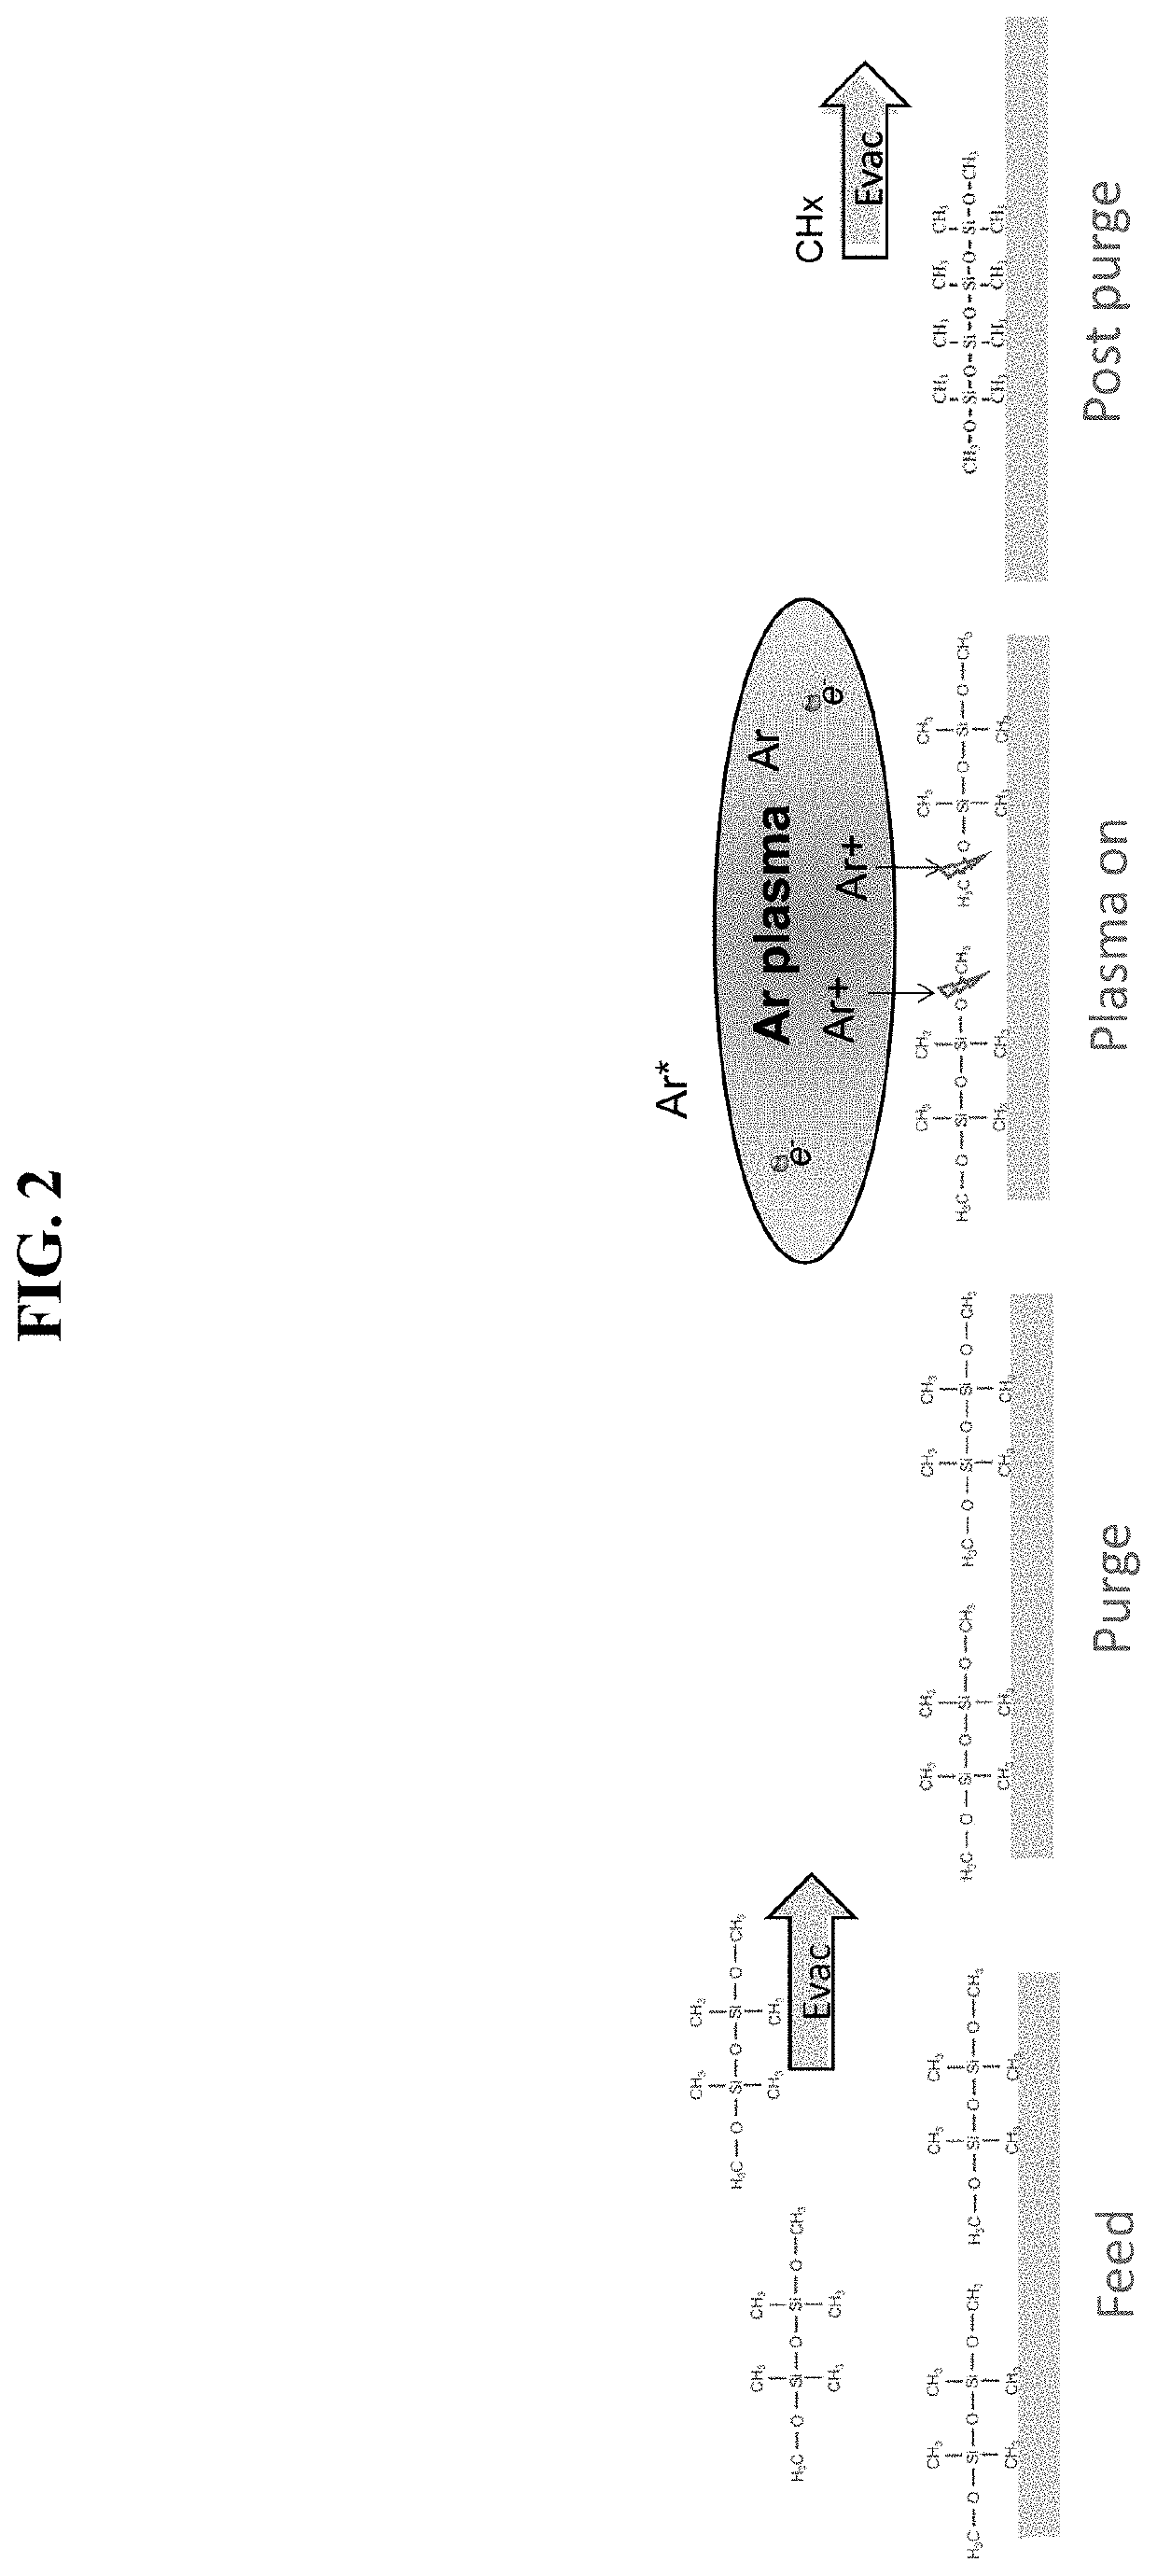 Structures including dielectric layers and methods of forming same